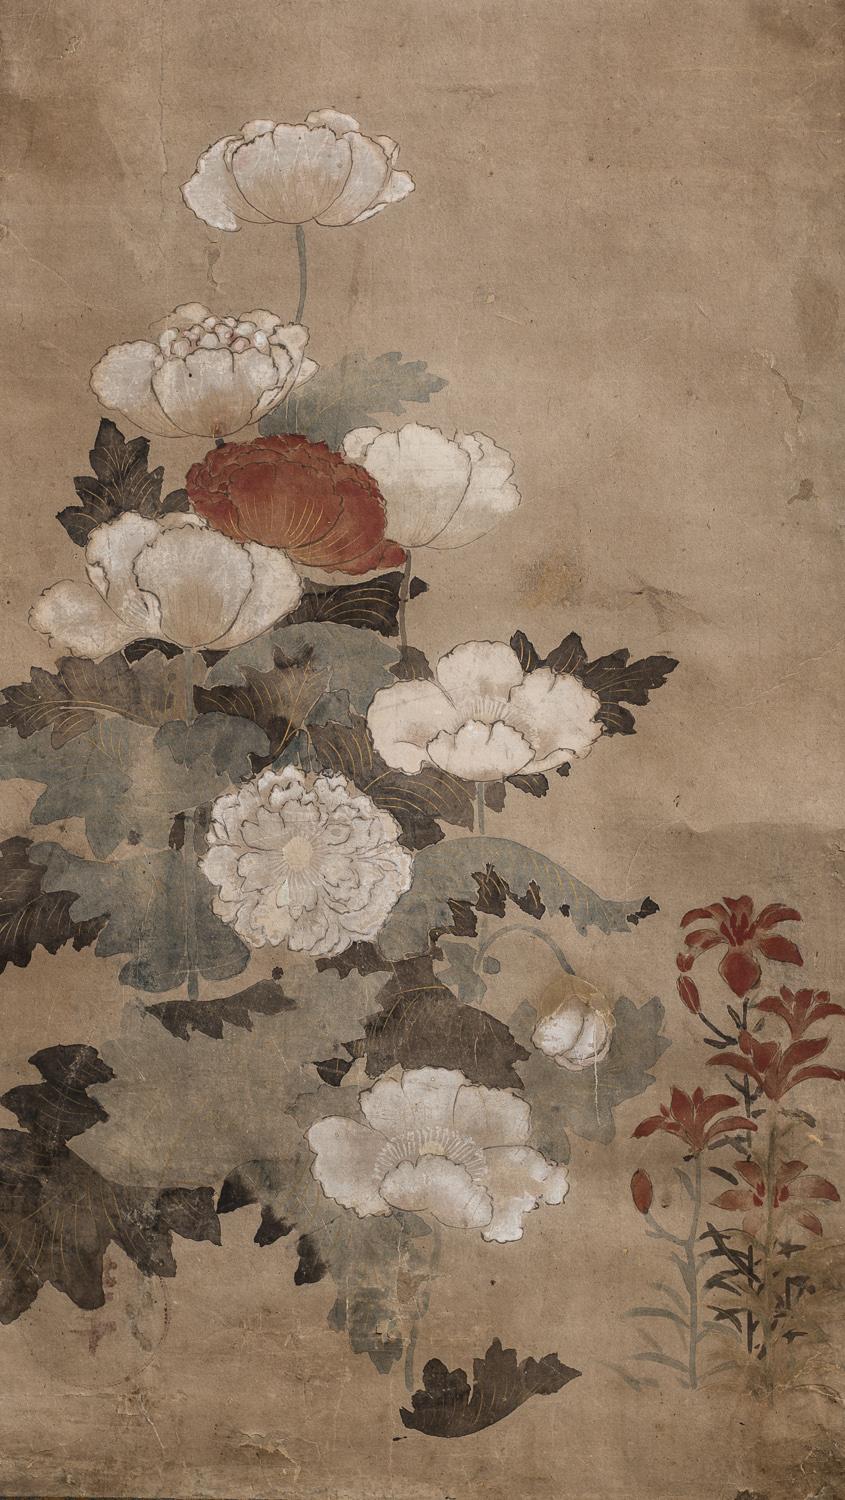 18th century Japanese scroll of poppies. Edo Period (early 18th century) Japanese painting of poppies with lilies in the background. Seal on the lower left reads: Inen. Mineral pigments painted on paper with beautiful silk brocade mounting. Comes